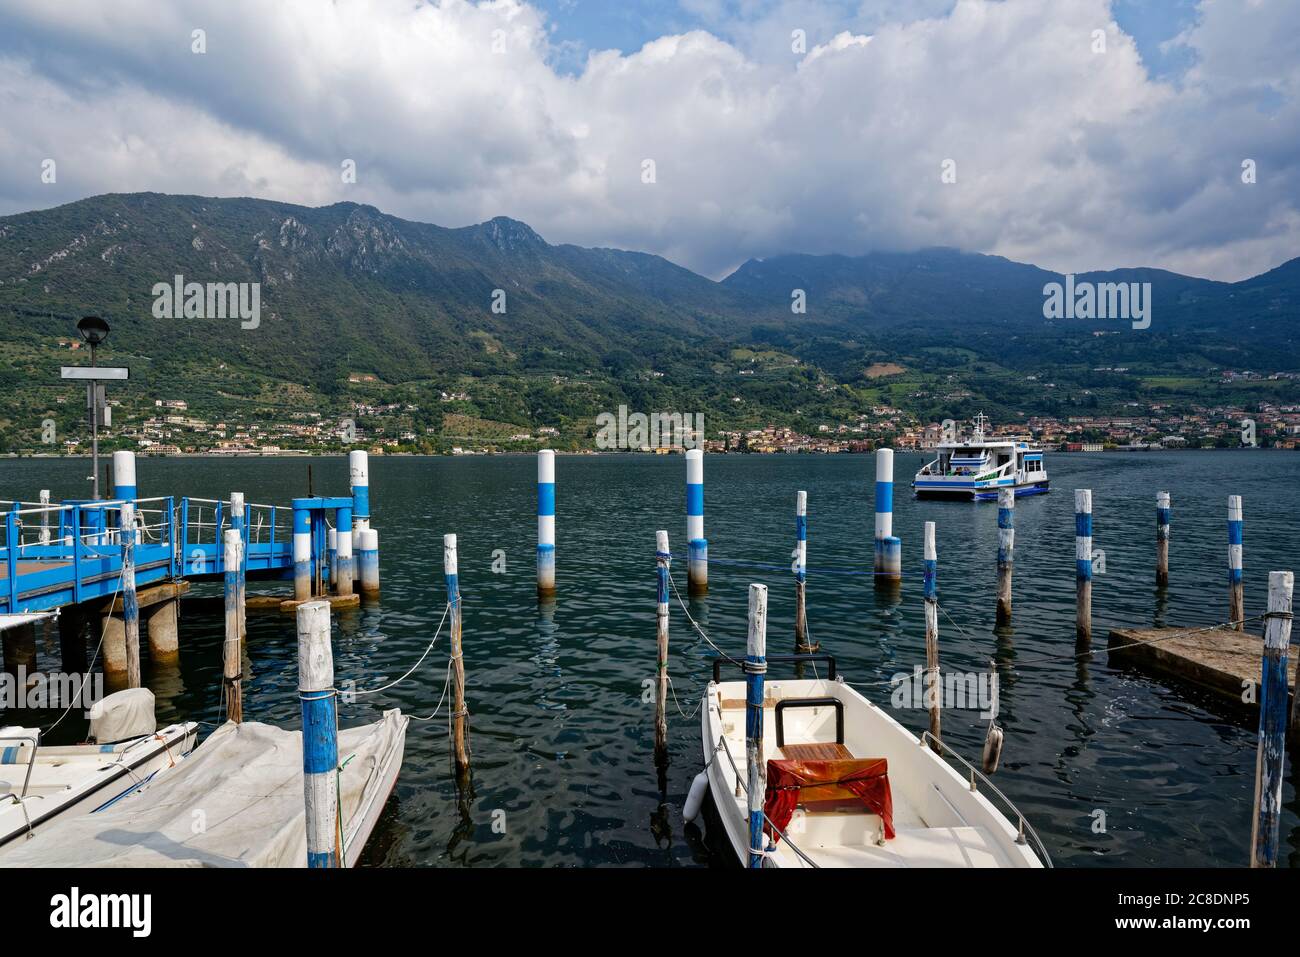 Taly, Lombardy, Boats moored on lake Iseo Stock Photo